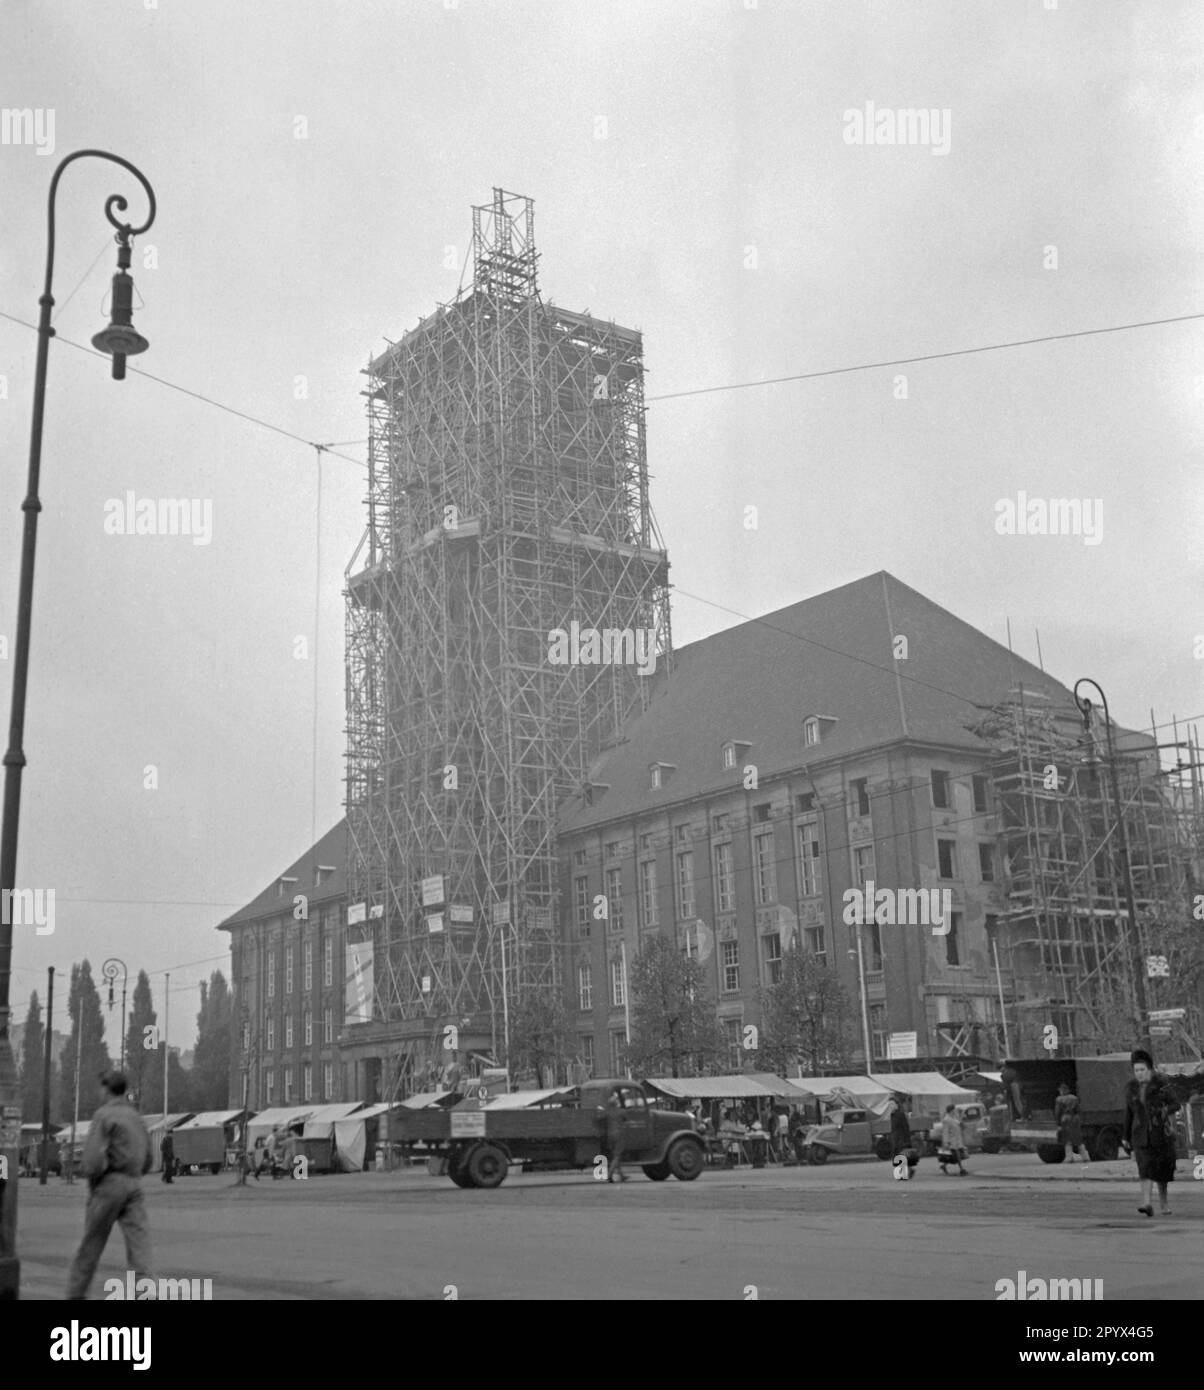 Photo of a weekly market on Rathausplatz and the decorated Rathaus Schoeneberg, the seat of the Governing Mayor of Berlin, Ernst Reuter (1948-1953) on October 21, 1950. On this date, the Freedom Bell was installed in the tower of the building. On the scaffold, a poster of the American occupation forces (inscription: Emergency Programme of Berlin with European Recovery Program). The bell sounded for the first time at the ceremony on the United Nations Day (UN) on 24 October. Stock Photo